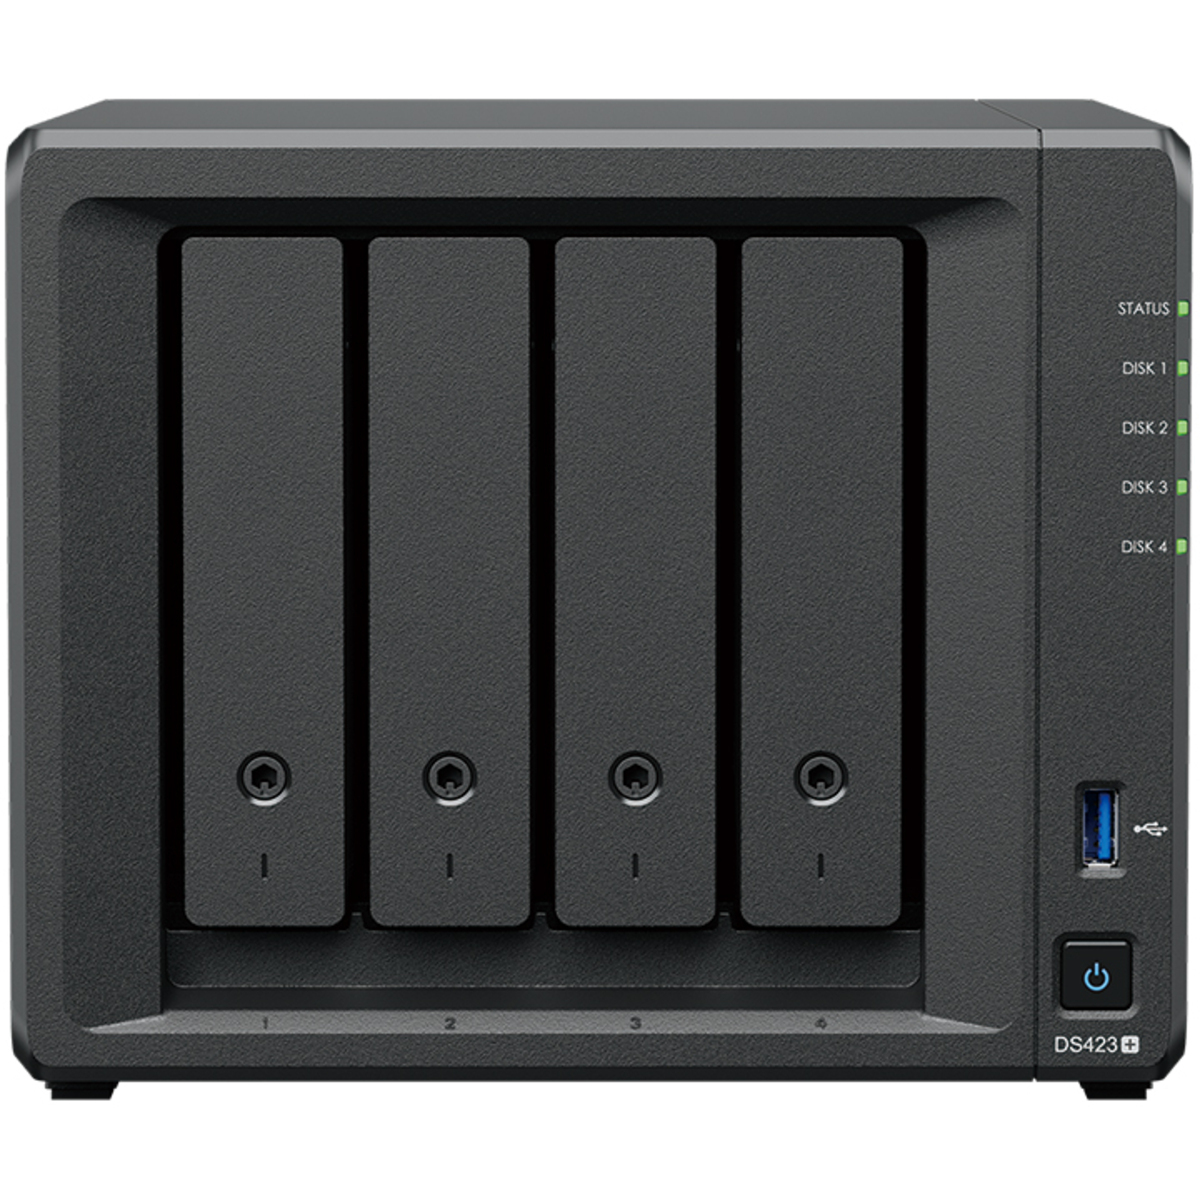 Synology DiskStation DS423+ 48tb 4-Bay Desktop Multimedia / Power User / Business NAS - Network Attached Storage Device 4x12tb Seagate EXOS X18 ST12000NM000J 3.5 7200rpm SATA 6Gb/s HDD ENTERPRISE Class Drives Installed - Burn-In Tested - FREE RAM UPGRADE DiskStation DS423+